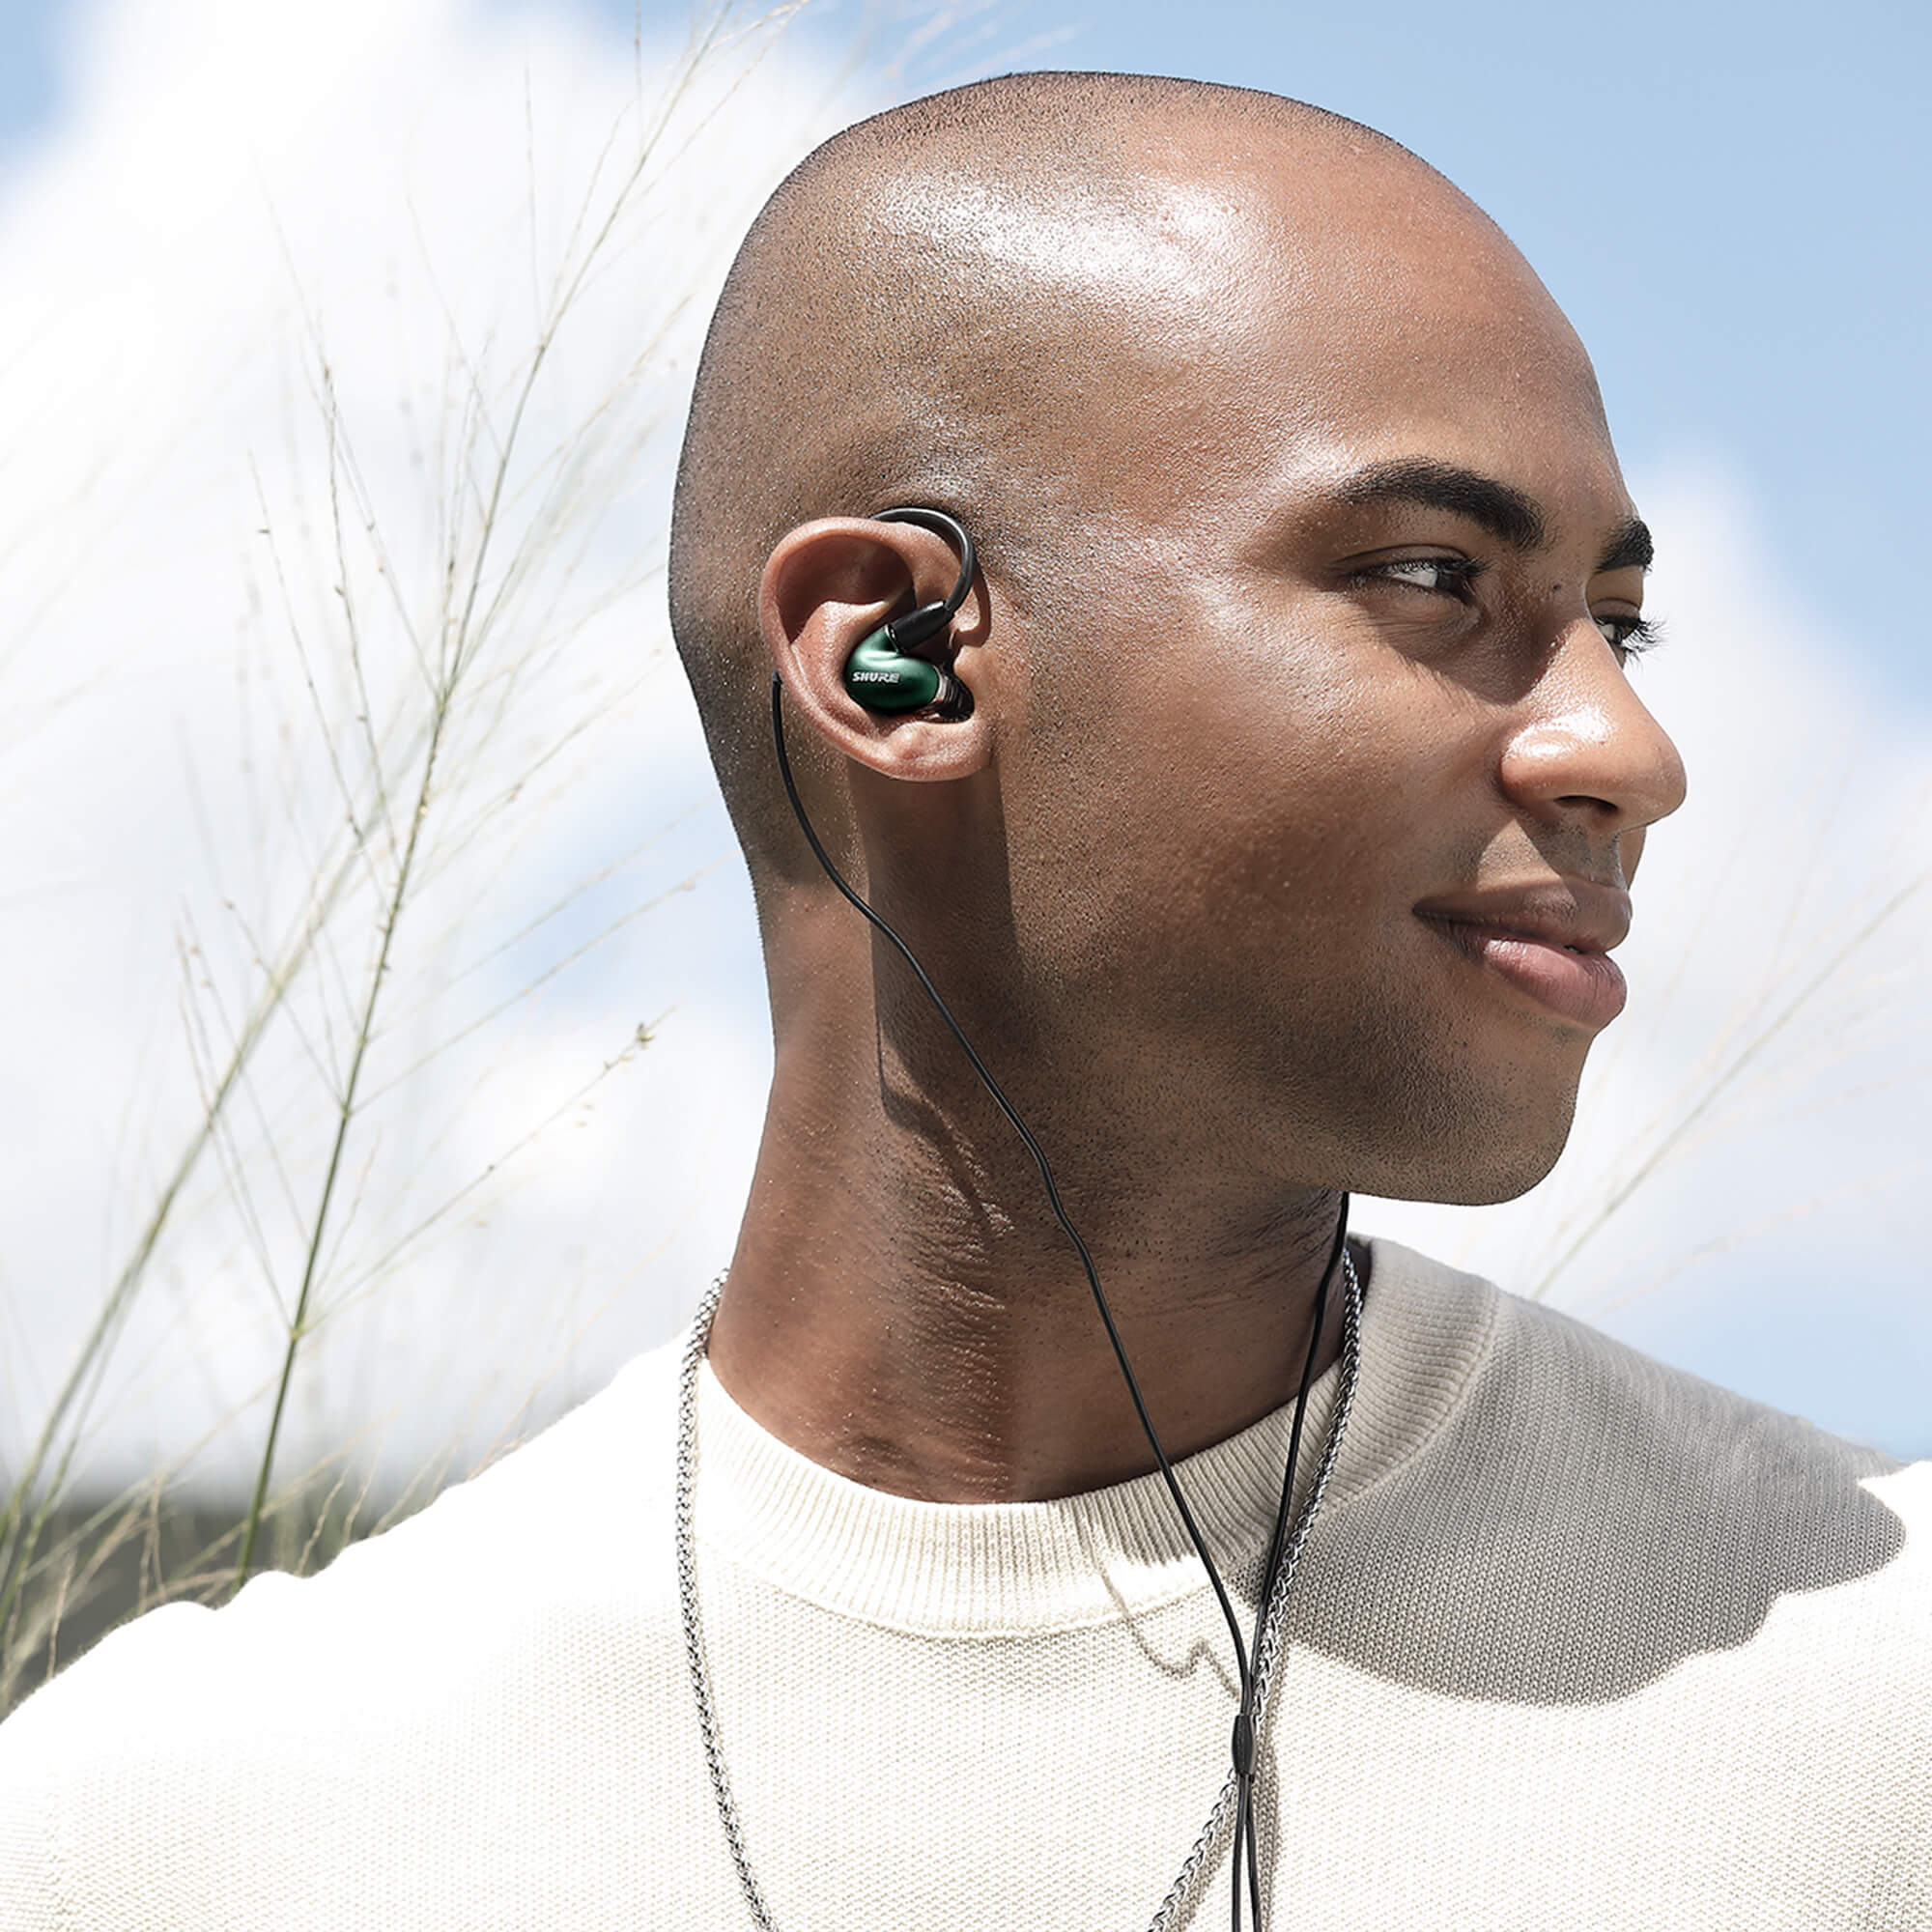 SE846 Gen 2 - Sound Isolating™ Earphones - Shure Middle East and